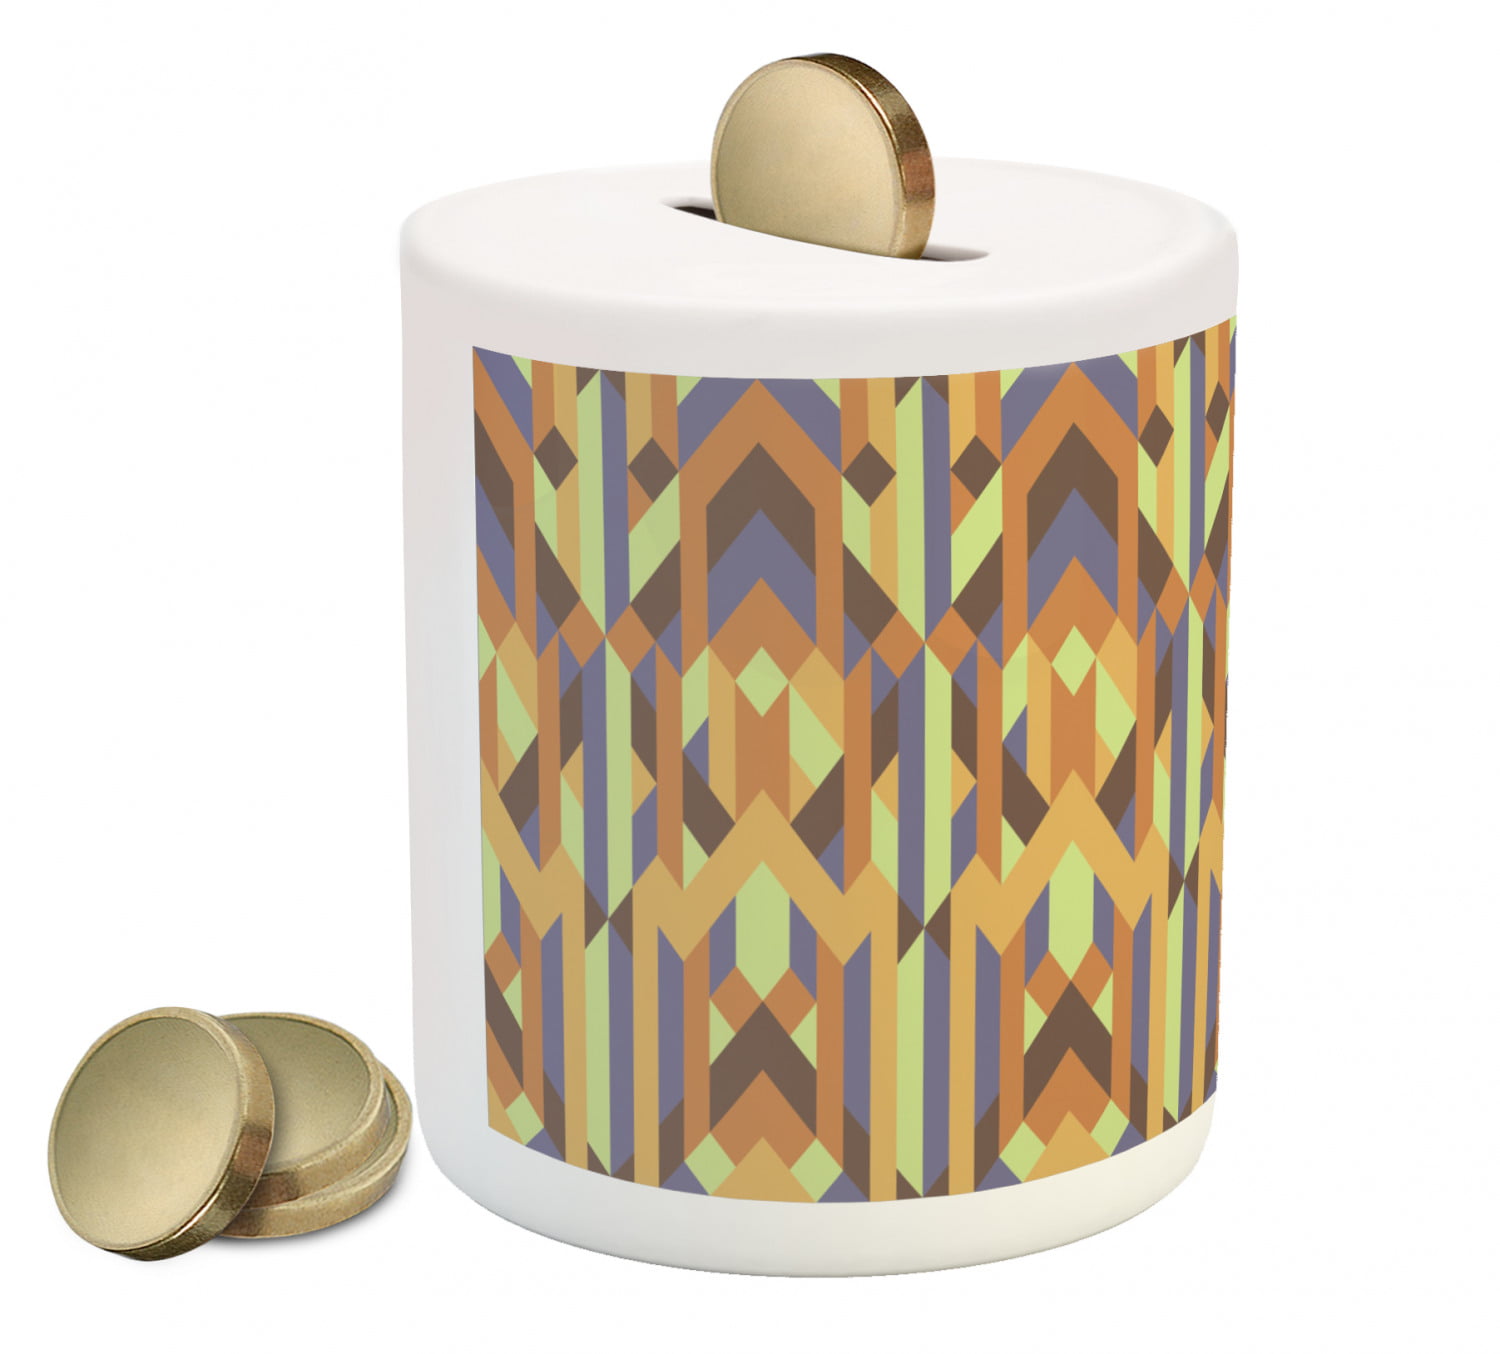 Verscherpen In hoeveelheid trui Earth Tones Piggy Bank, Geometric Pattern with Retro Style Inspired by  Intricacy of Gothic Era, Ceramic Coin Bank Money Box for Cash Saving, 3.6"  X 3.2", Multicolor, by Ambesonne - Walmart.com